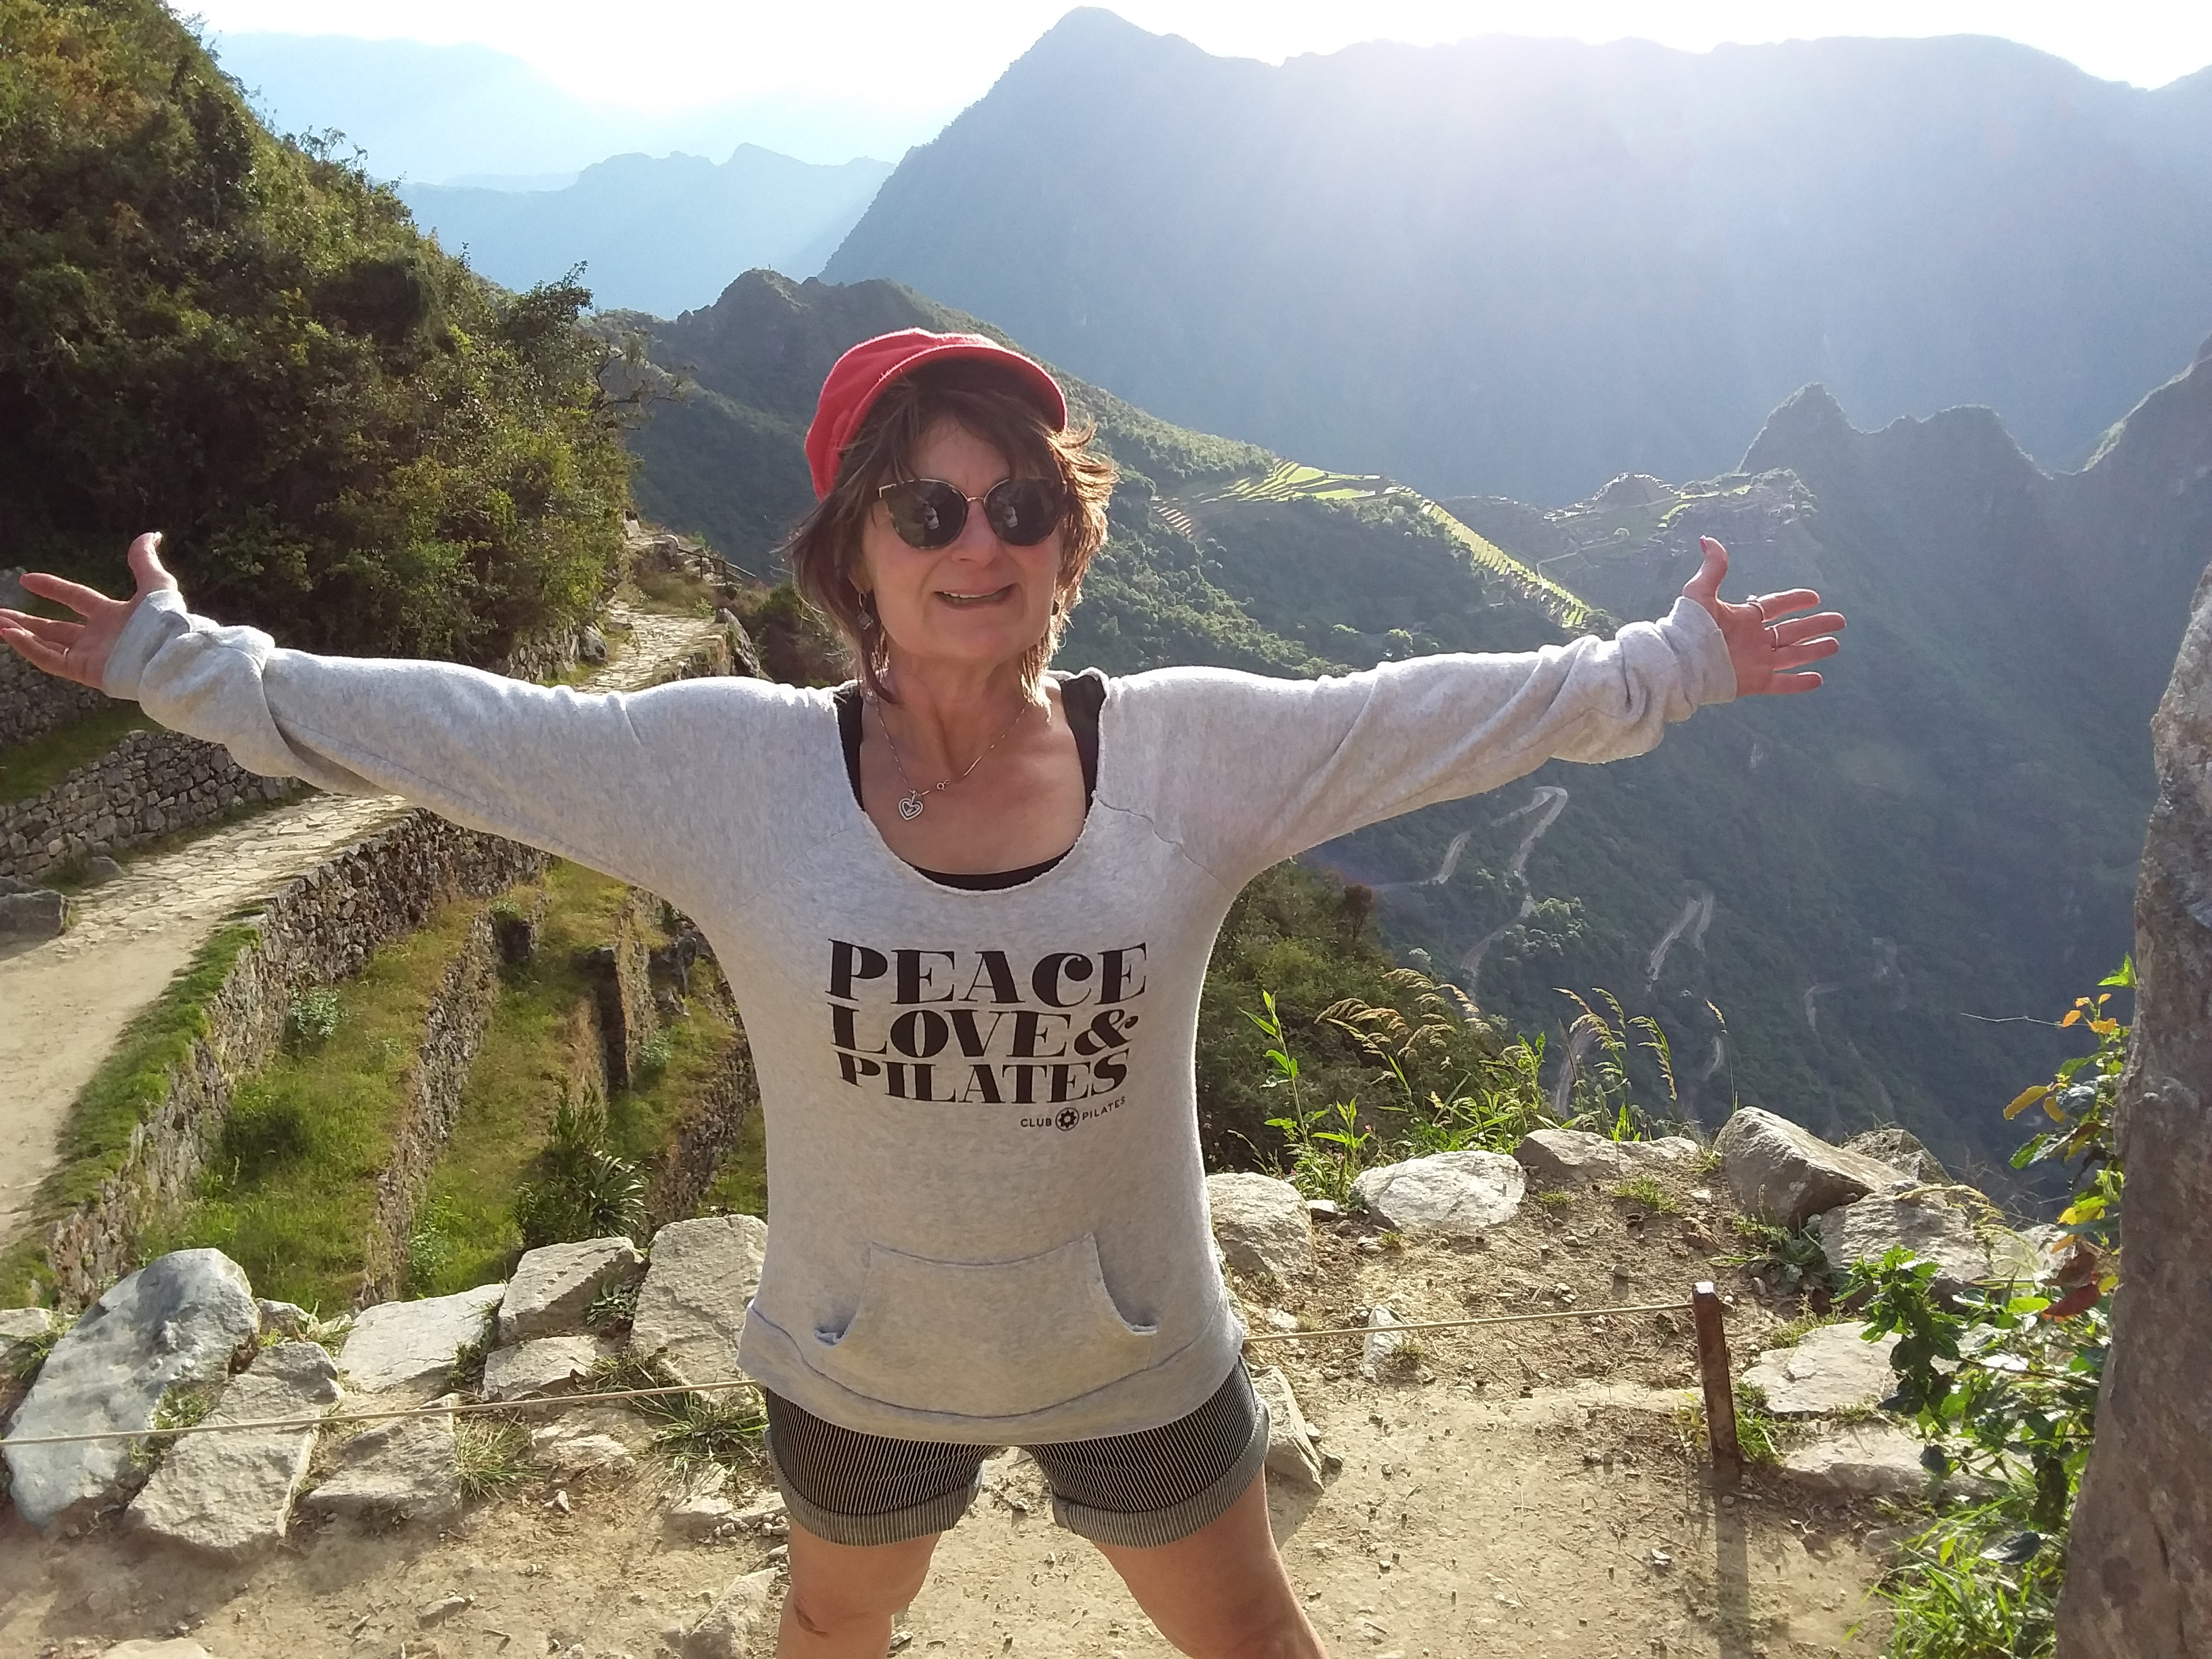 Using Pilates to Climb Mountains - Claudette's Story